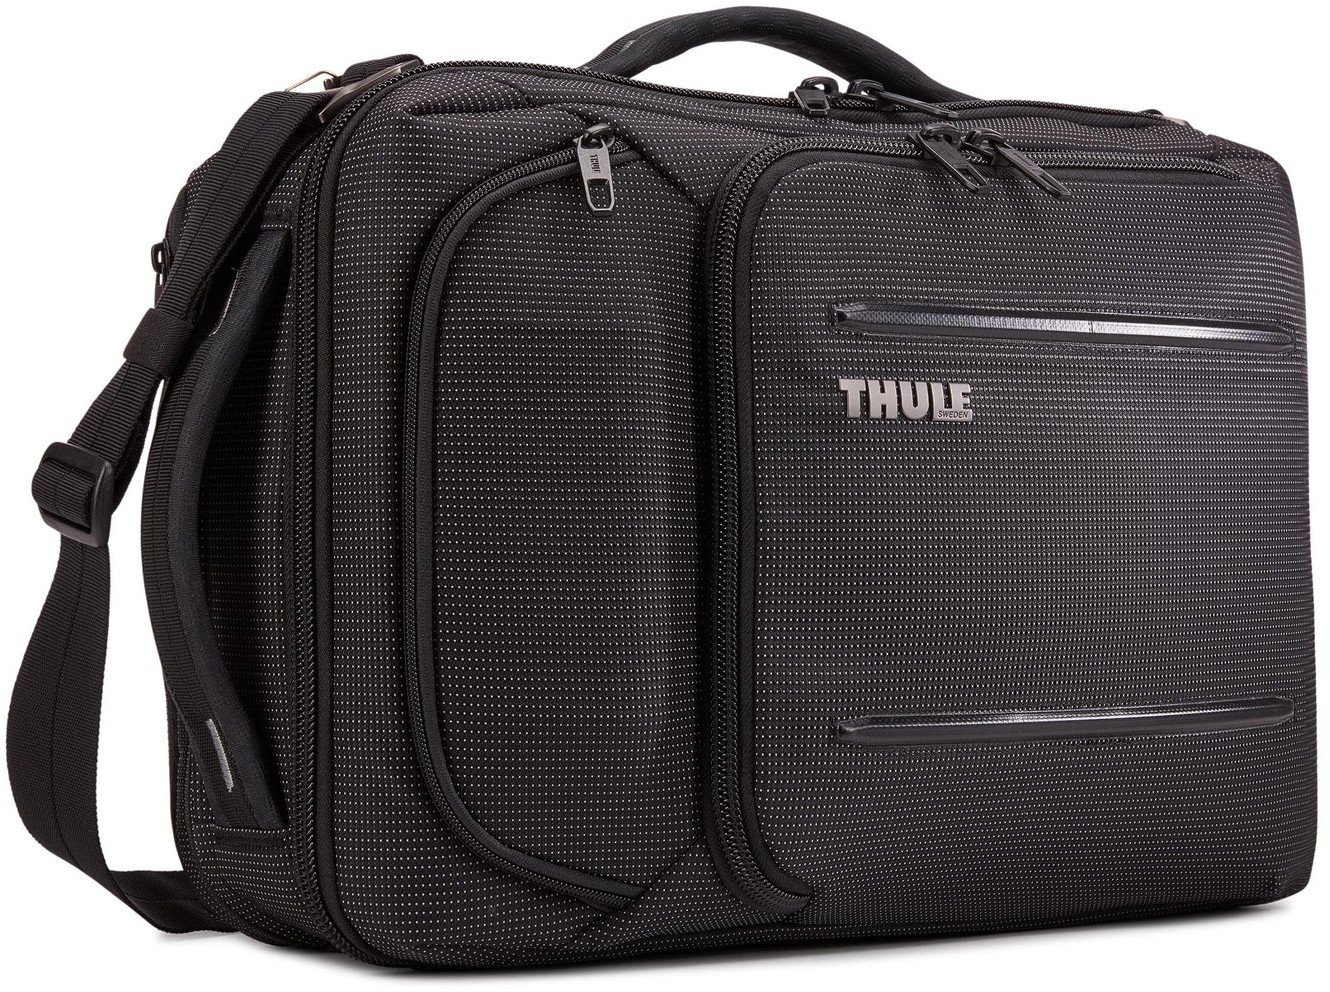 Thule Crossover 2 Convertible Laptop Bag 15.6" 3203841